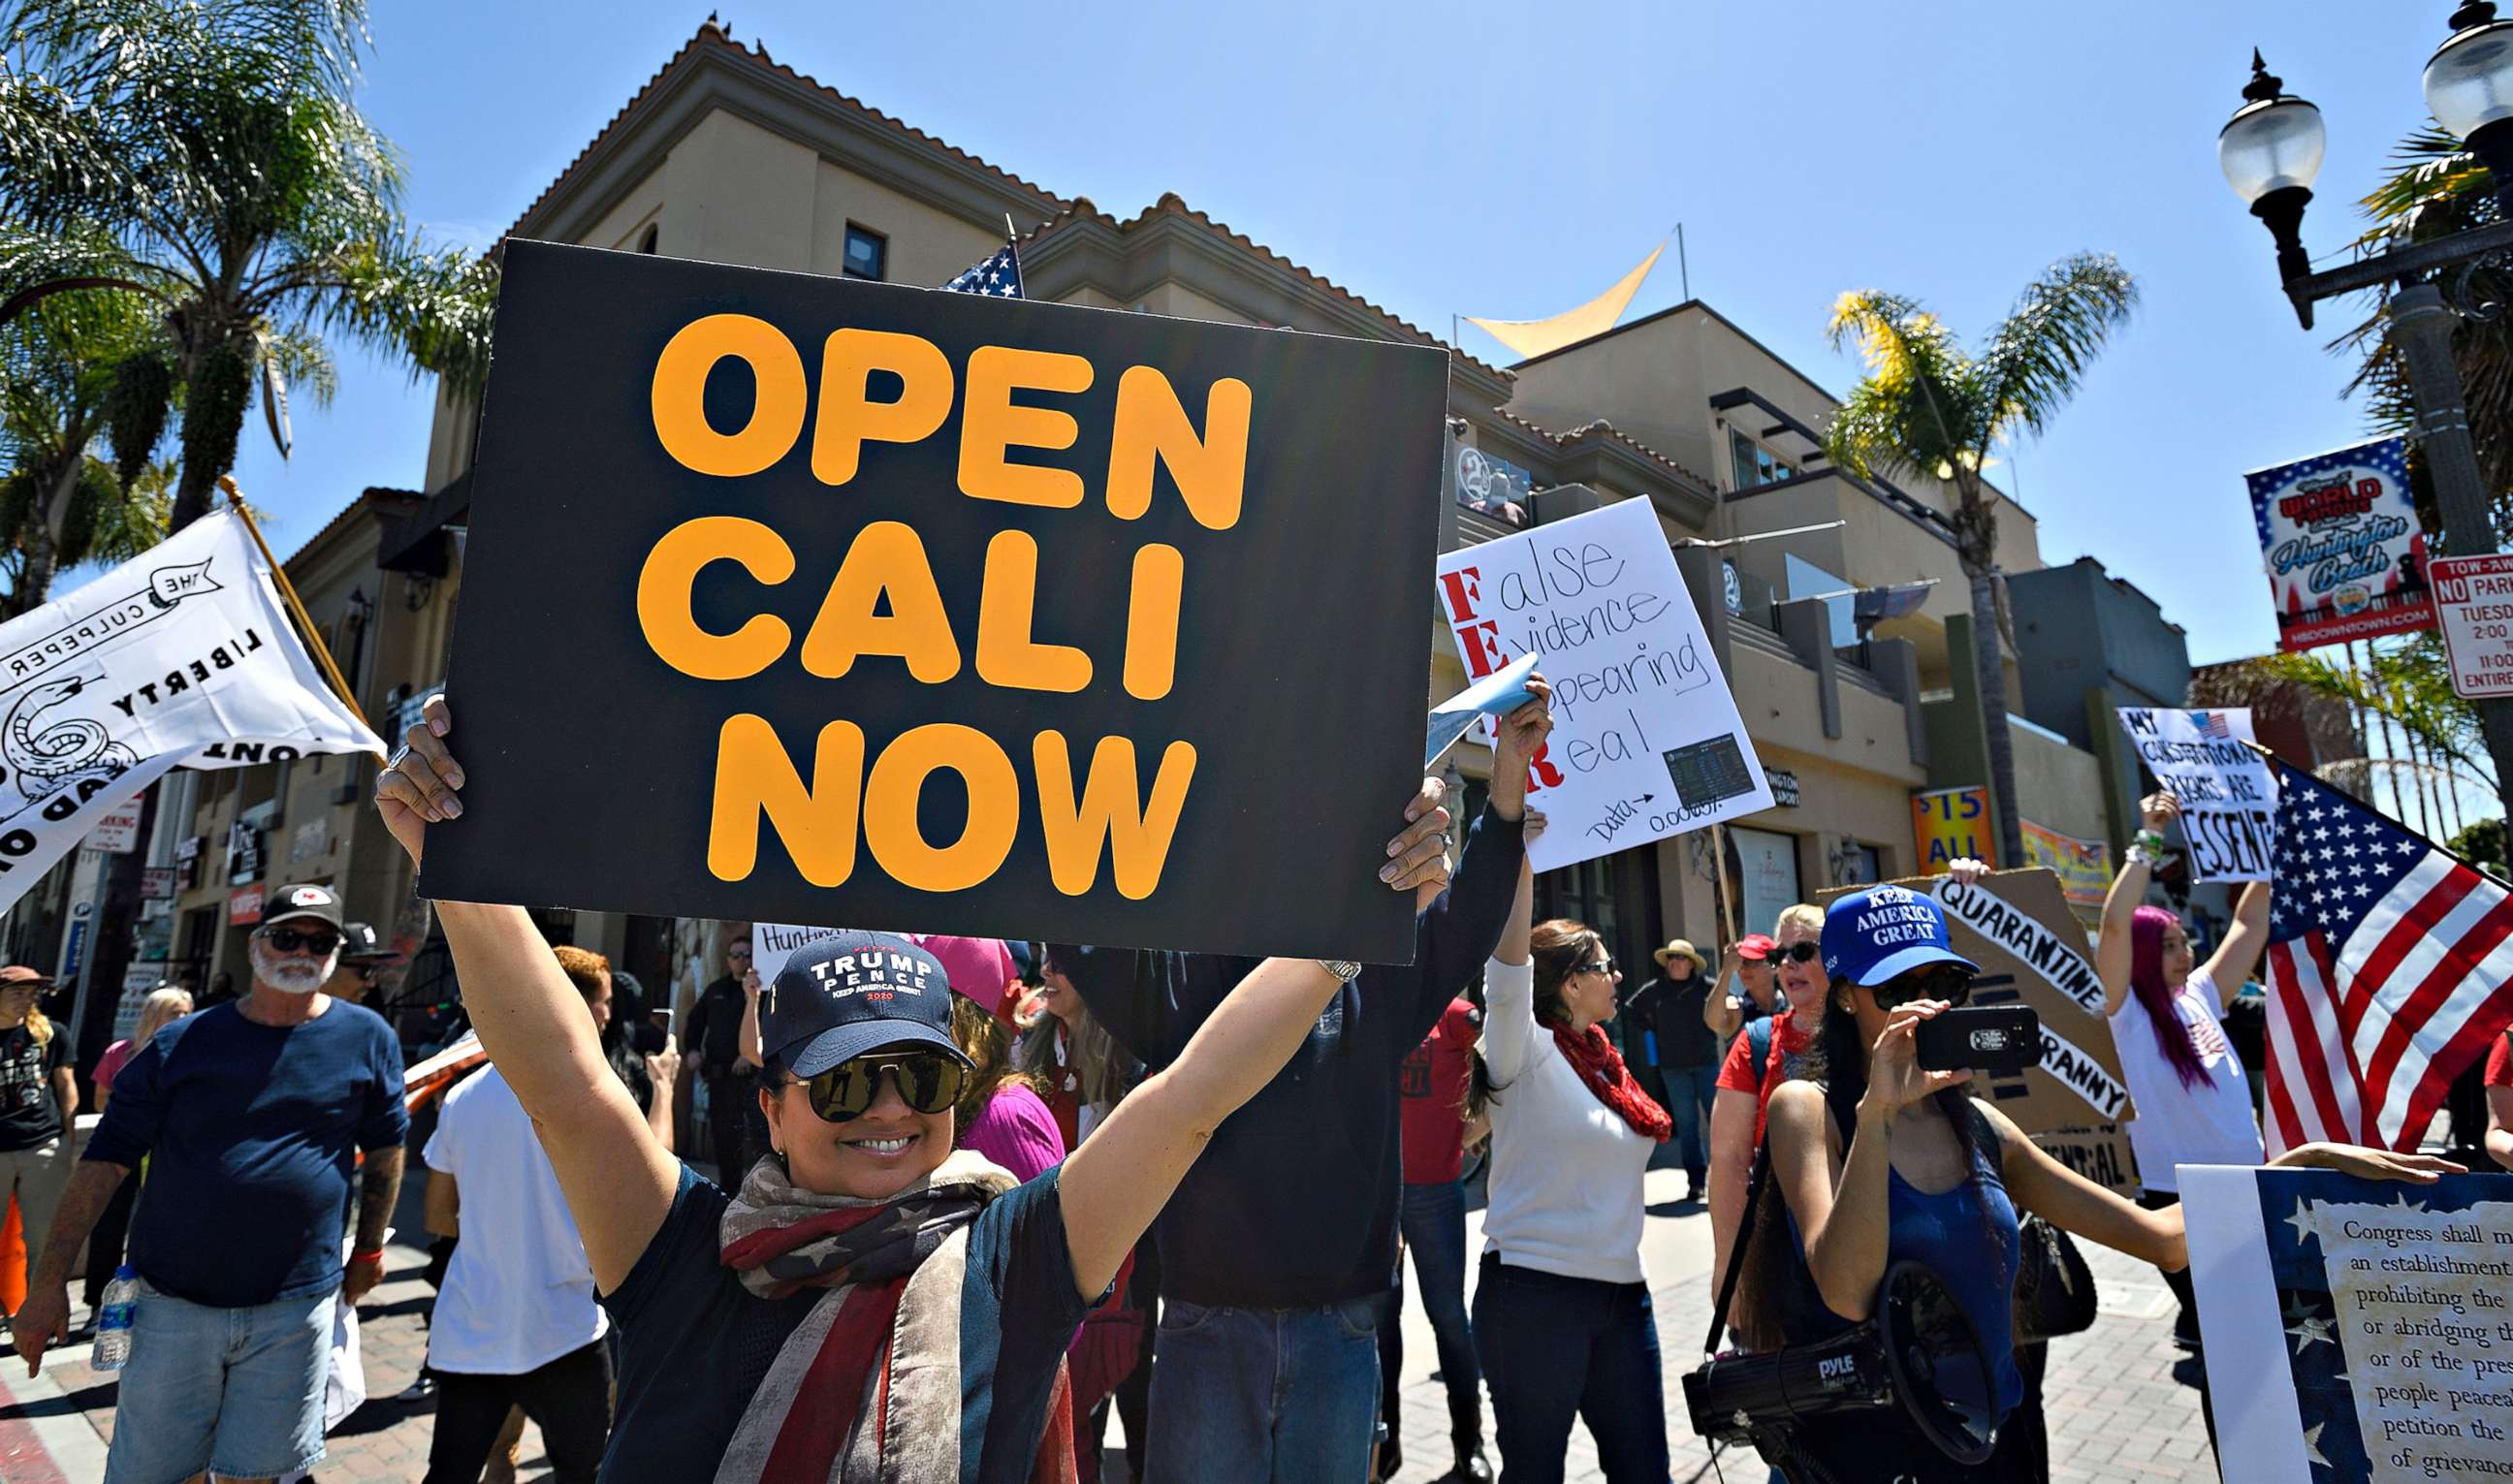 PHOTO: Rose Riggio, from Los Angeles, joins a crowd of people gathered at the corner of Main Street and Walnut Avenue in Huntington Beach, Calif., to protest coronavirus (COVID-19) closures, April 17, 2020.